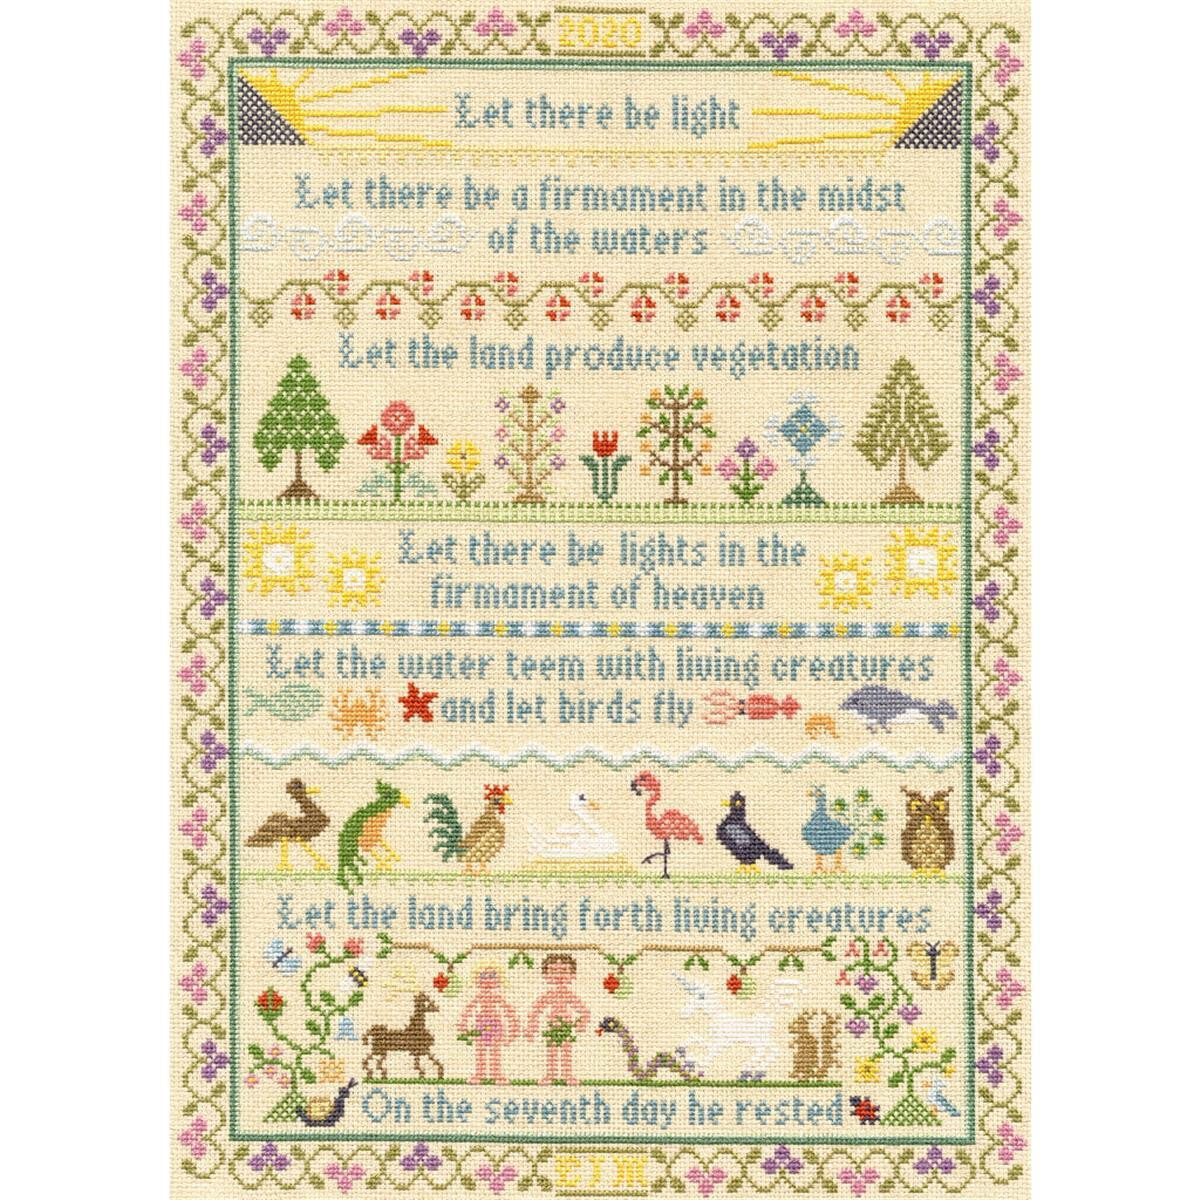 A cross stitch artwork or embroidery pack from Bothy...